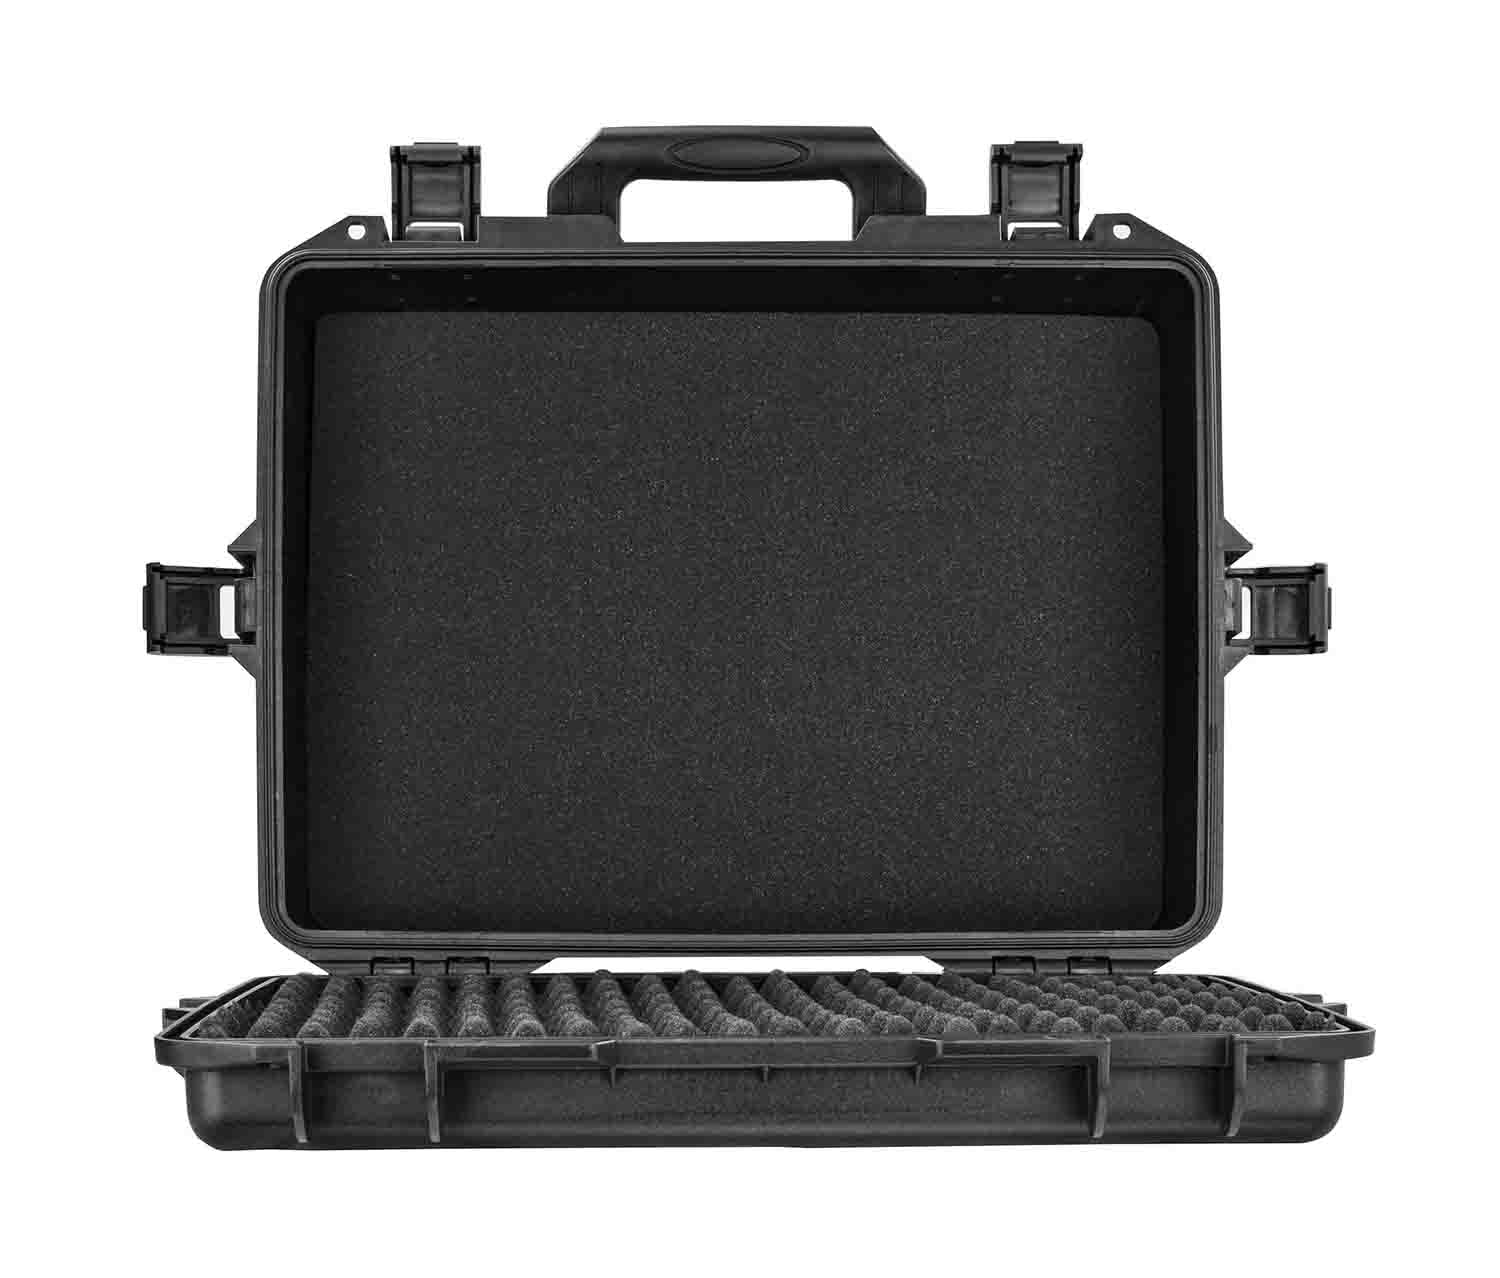 Odyssey VU191408 Bottom Interior with Pluck Foams Injection-Molded Utility Case - 19.25″ x 14.25″ x 8″ - Hollywood DJ